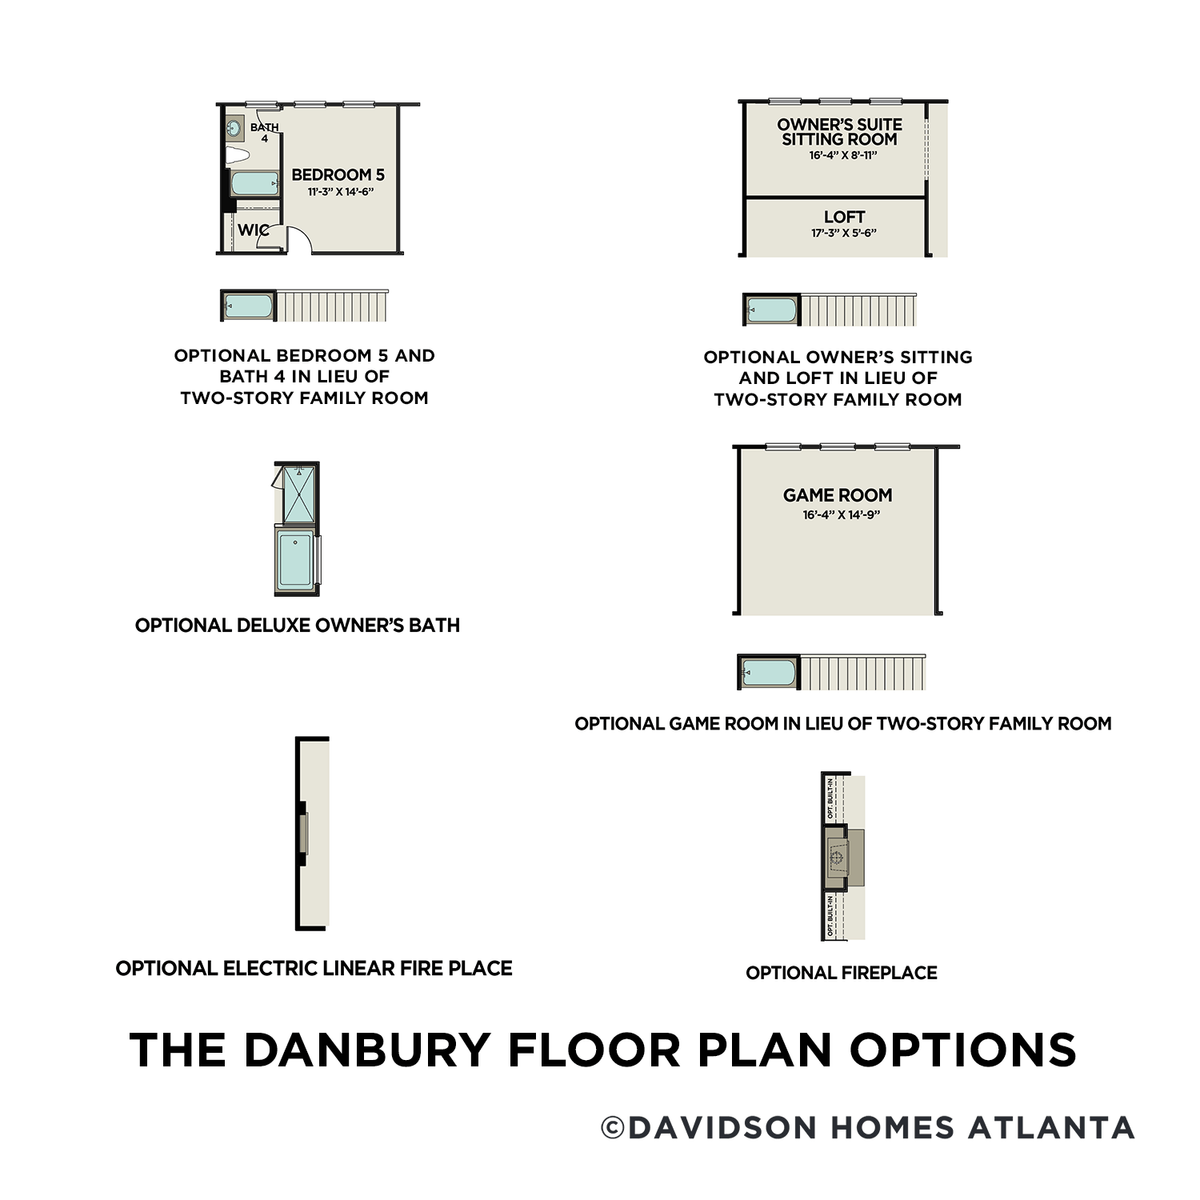 3 - The Danbury A buildable floor plan layout in Davidson Homes' Cooper Place community.